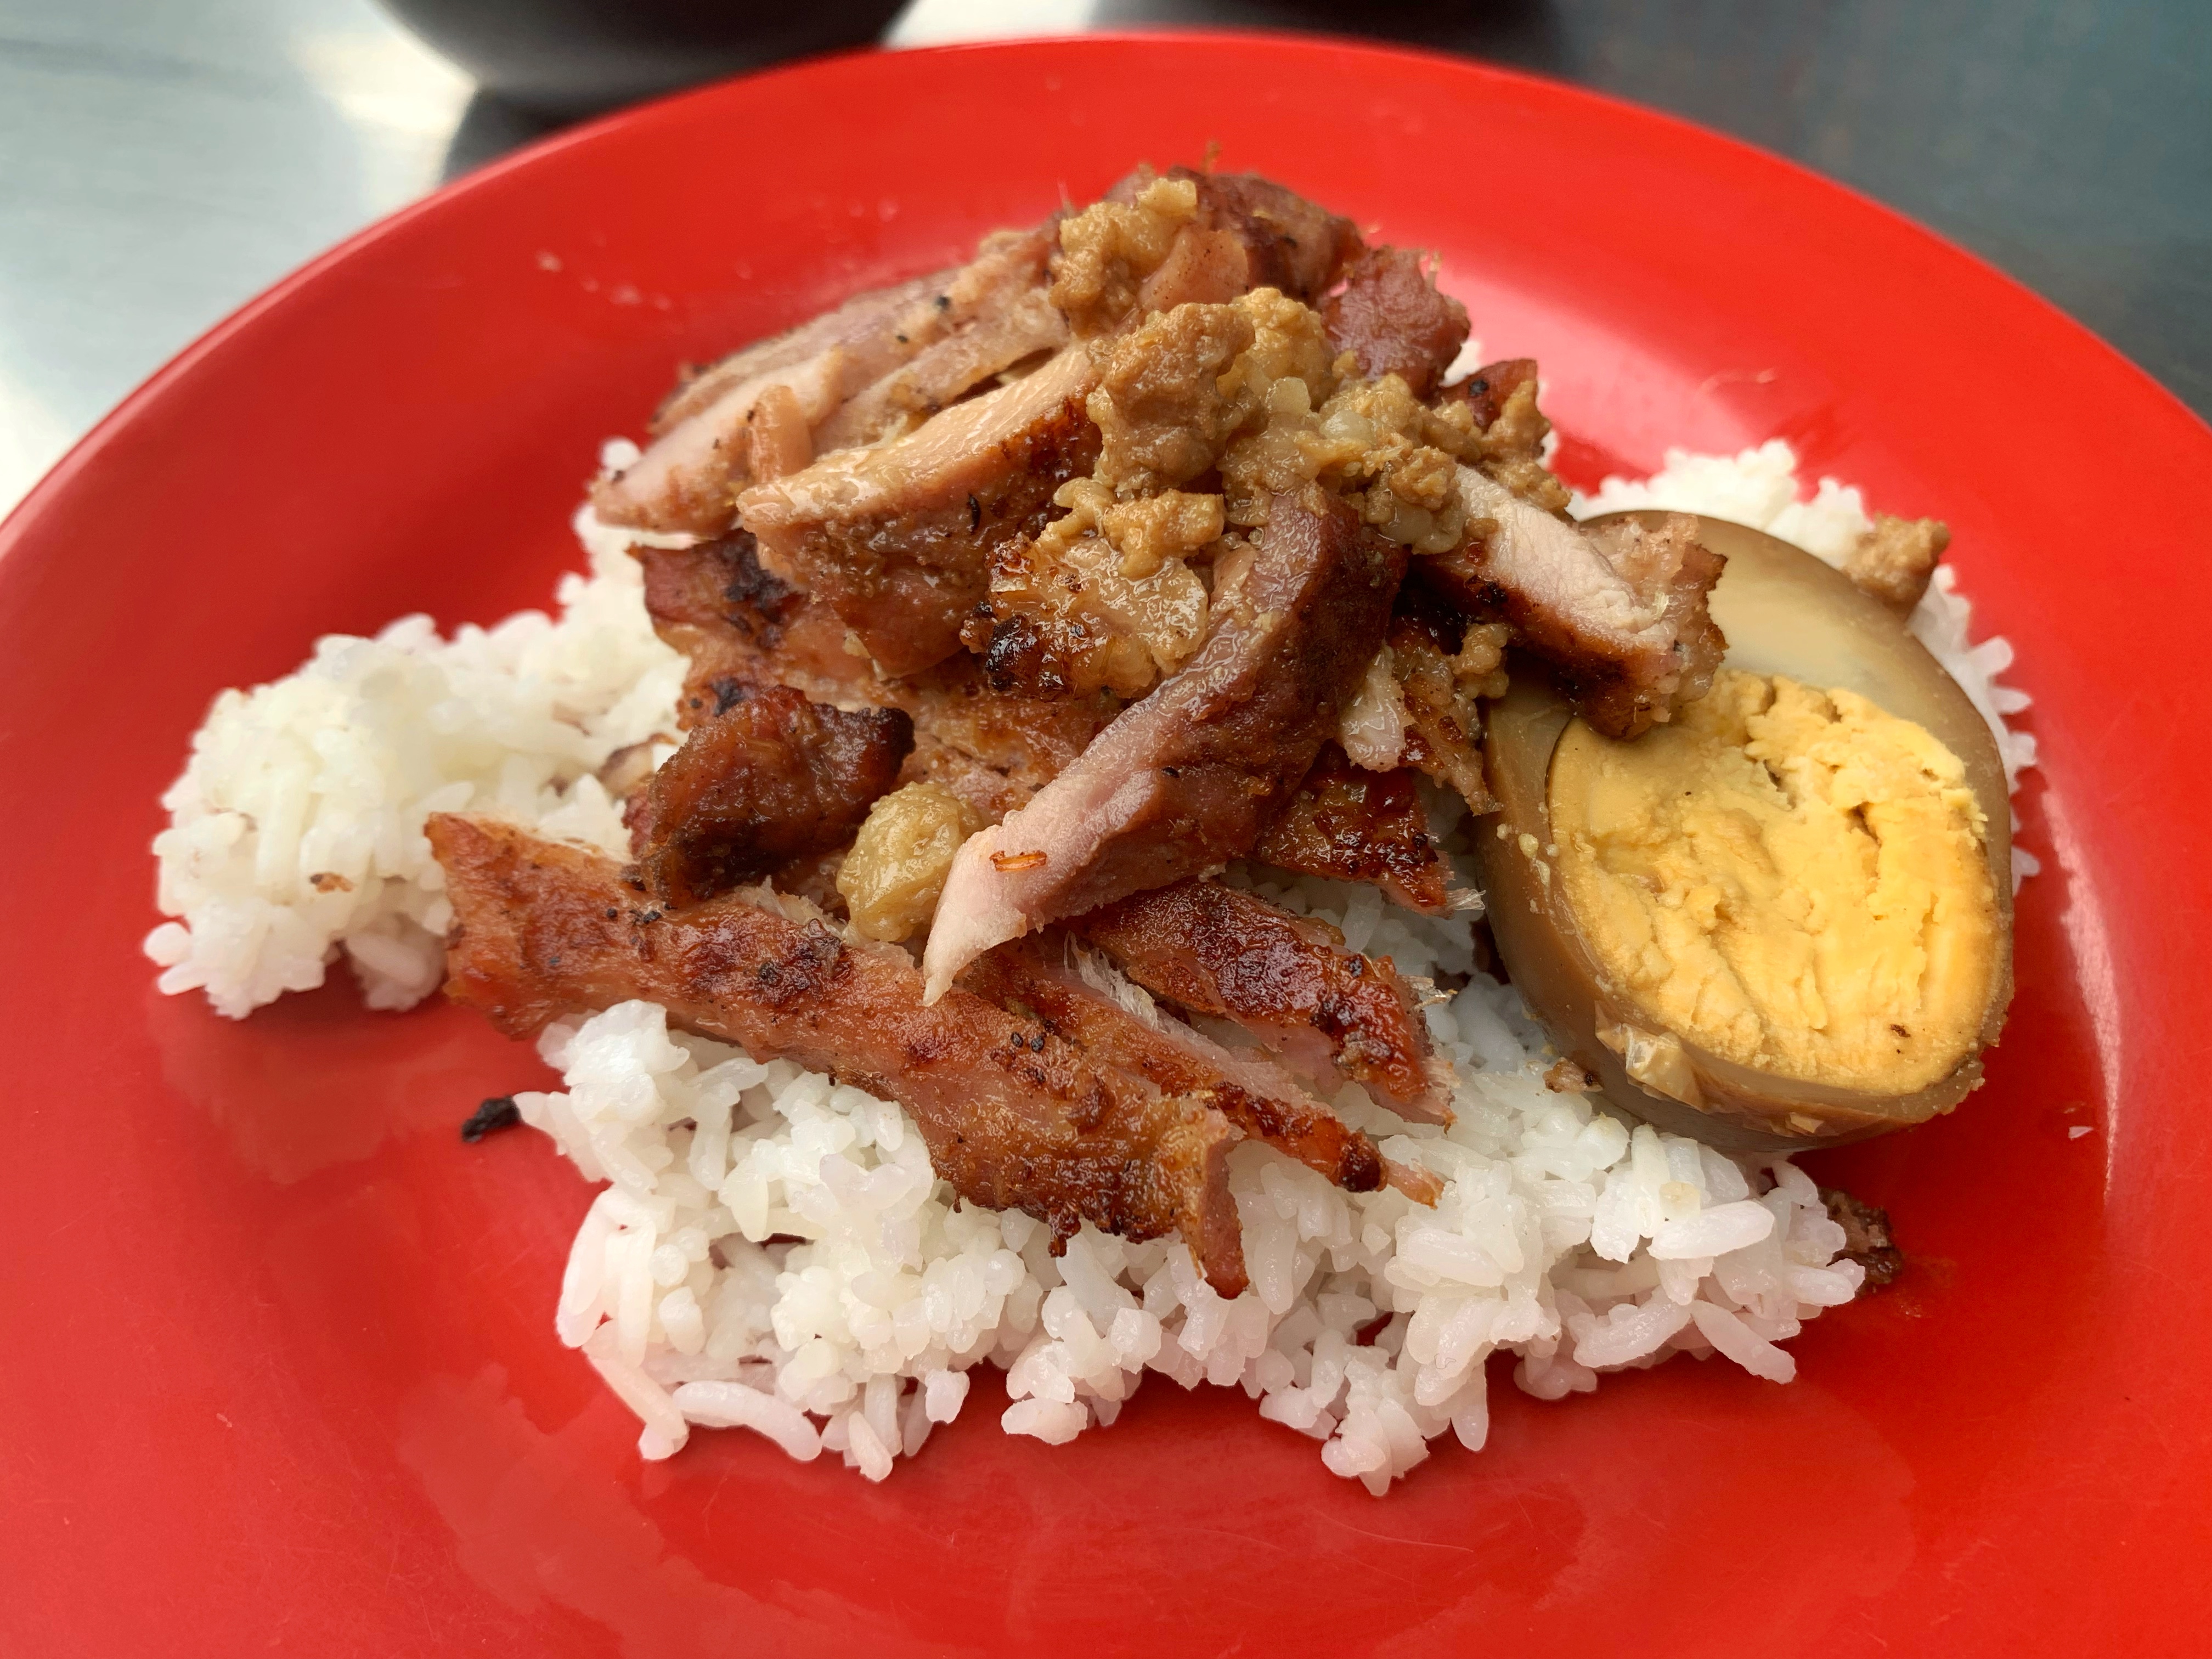 Bai Sach Chruk, or Cambodian Grilled Pork and Rice in Phnom Penh